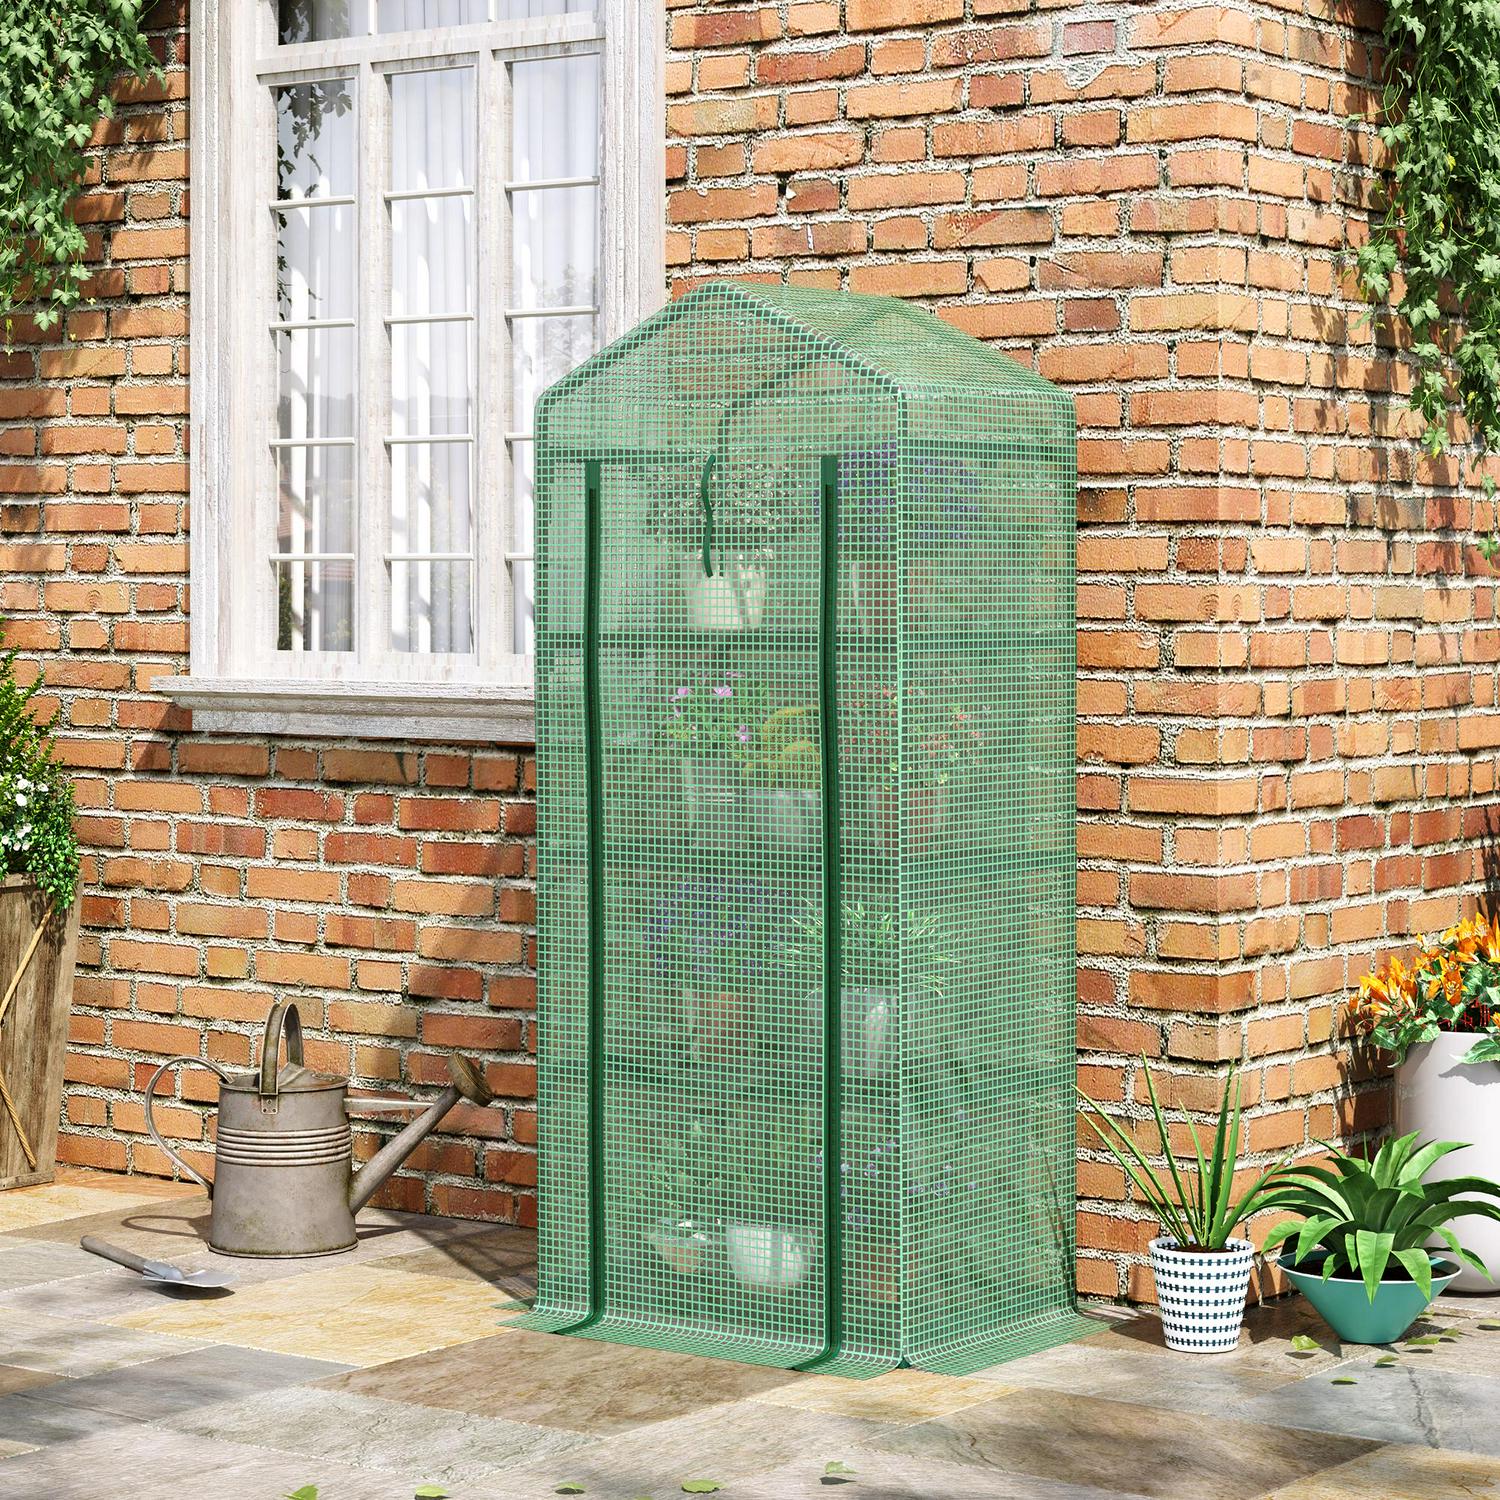 4 Tier Mini Greenhouse, Portable With Steel Frame, PE Cover, Roll-up Door, 69 X 50 160 Cm, Green